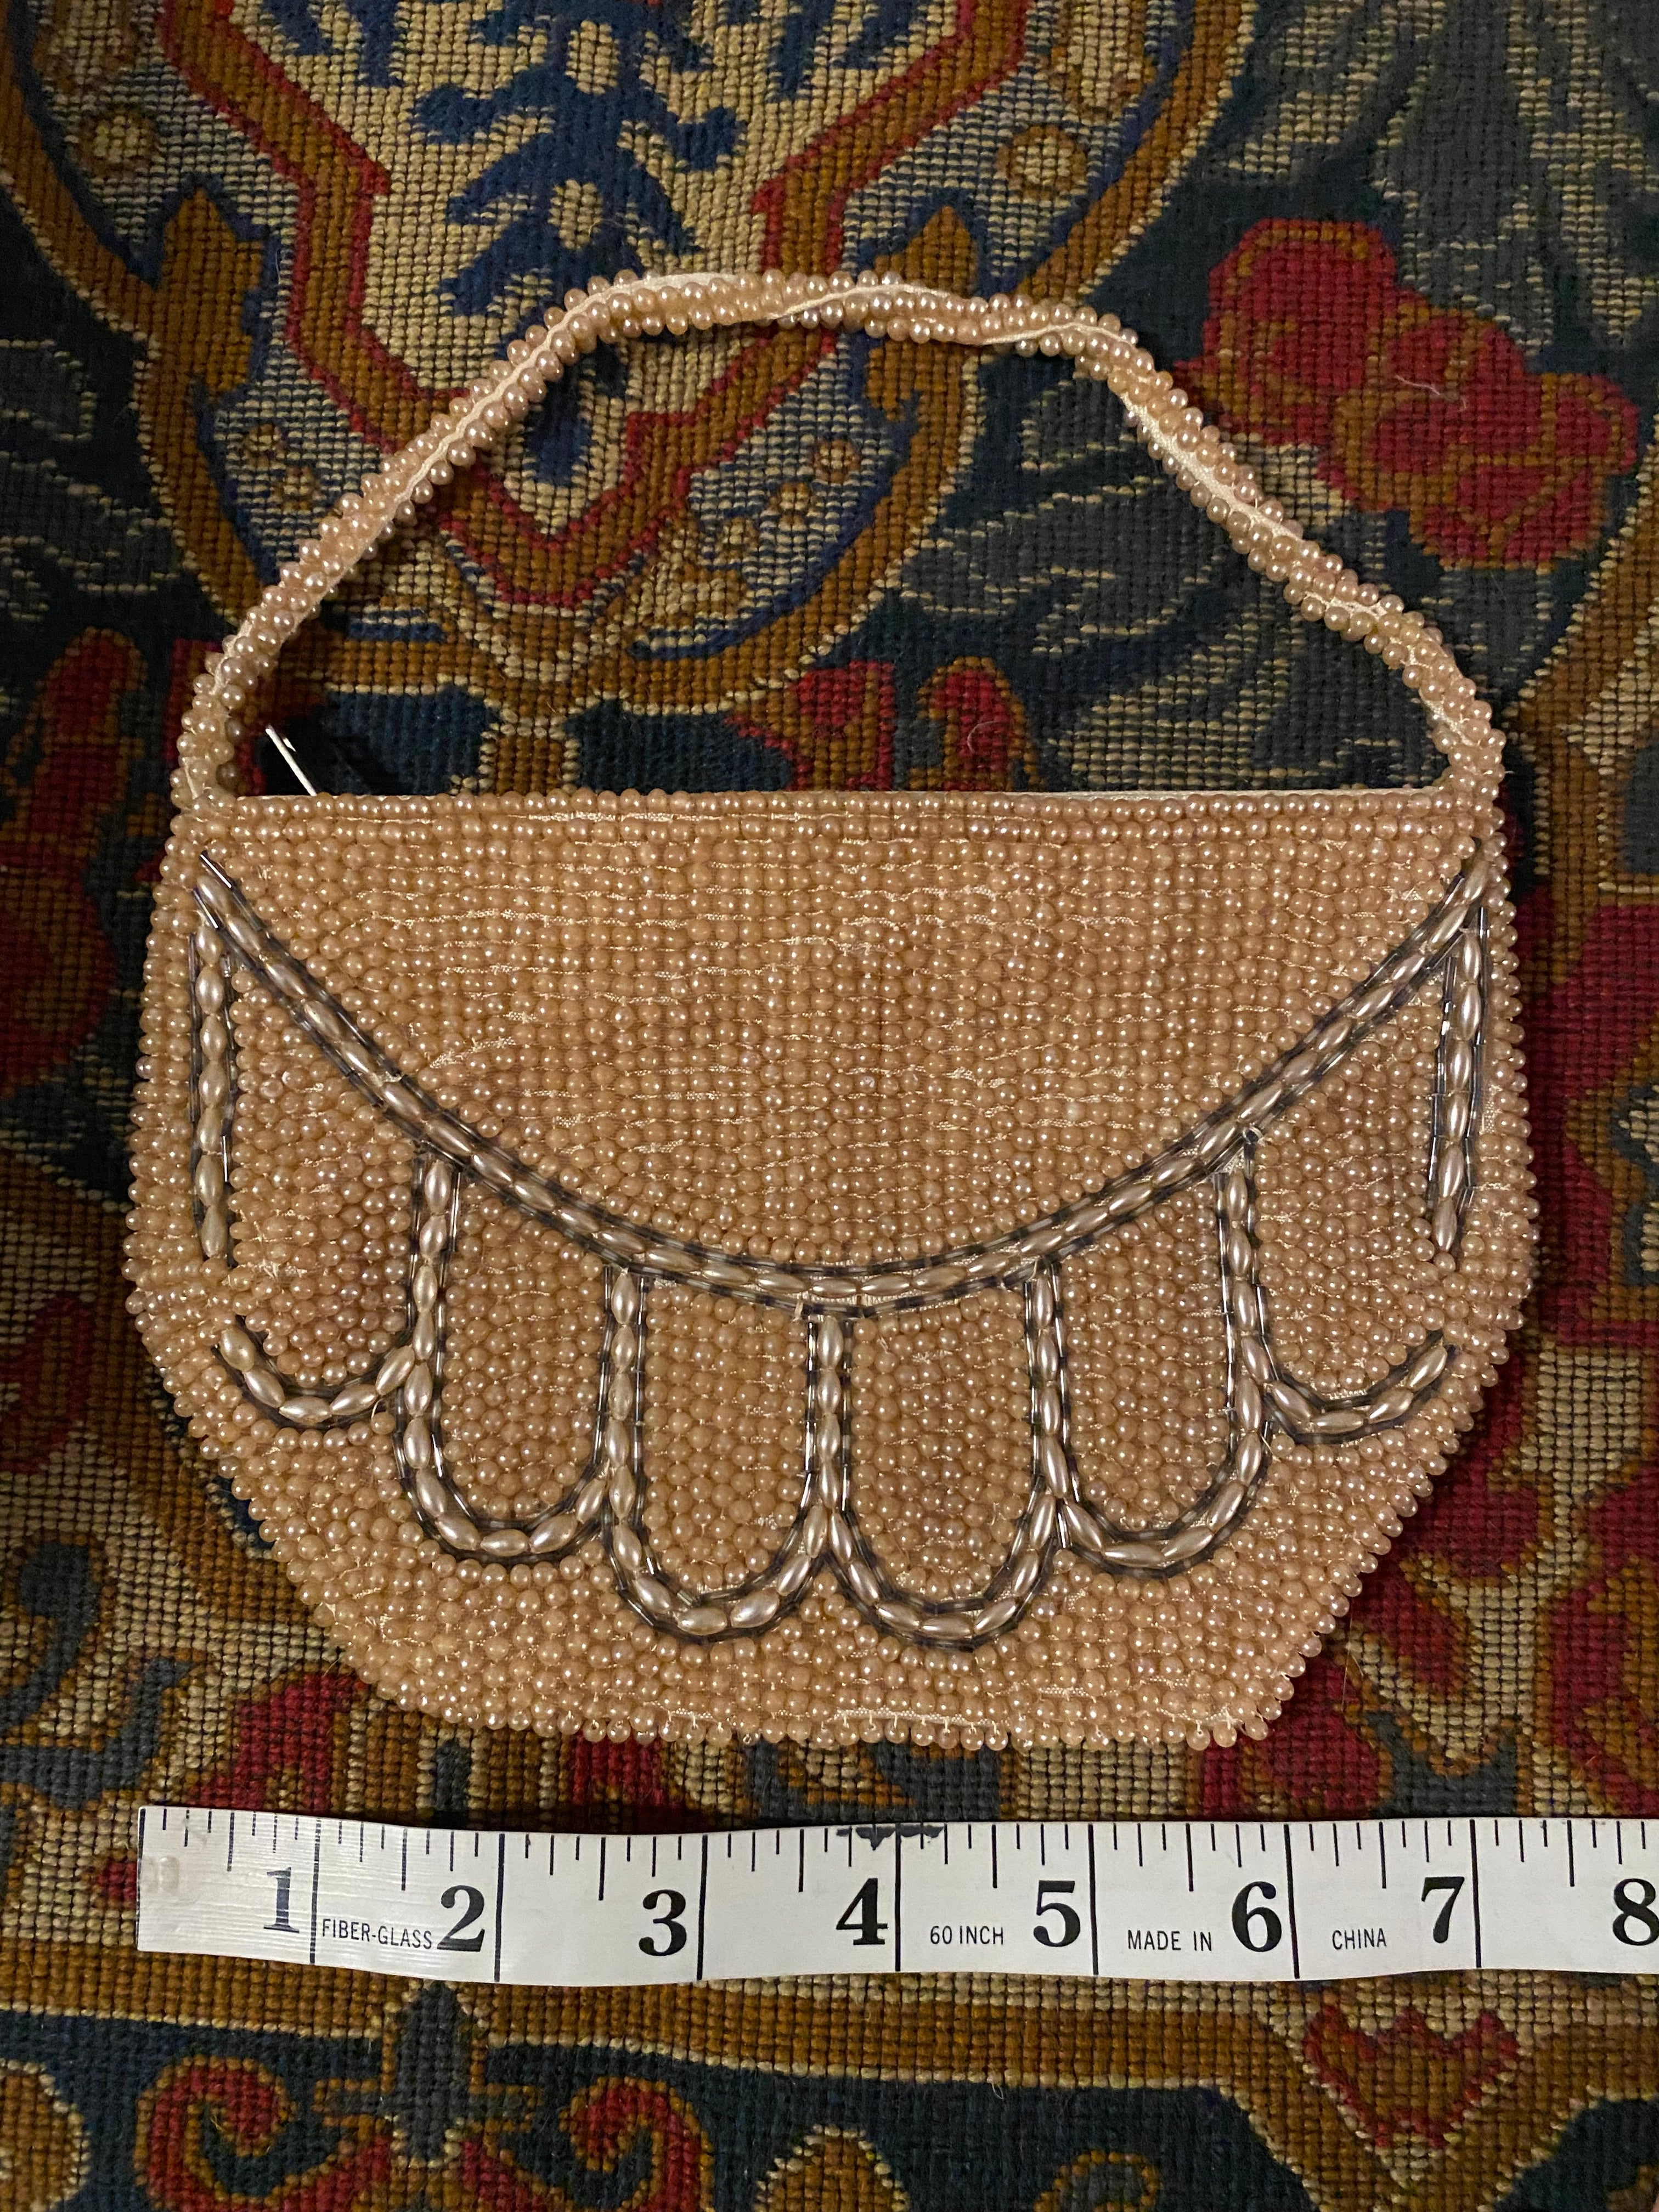 1930s Faux Pearl Beaded Purse